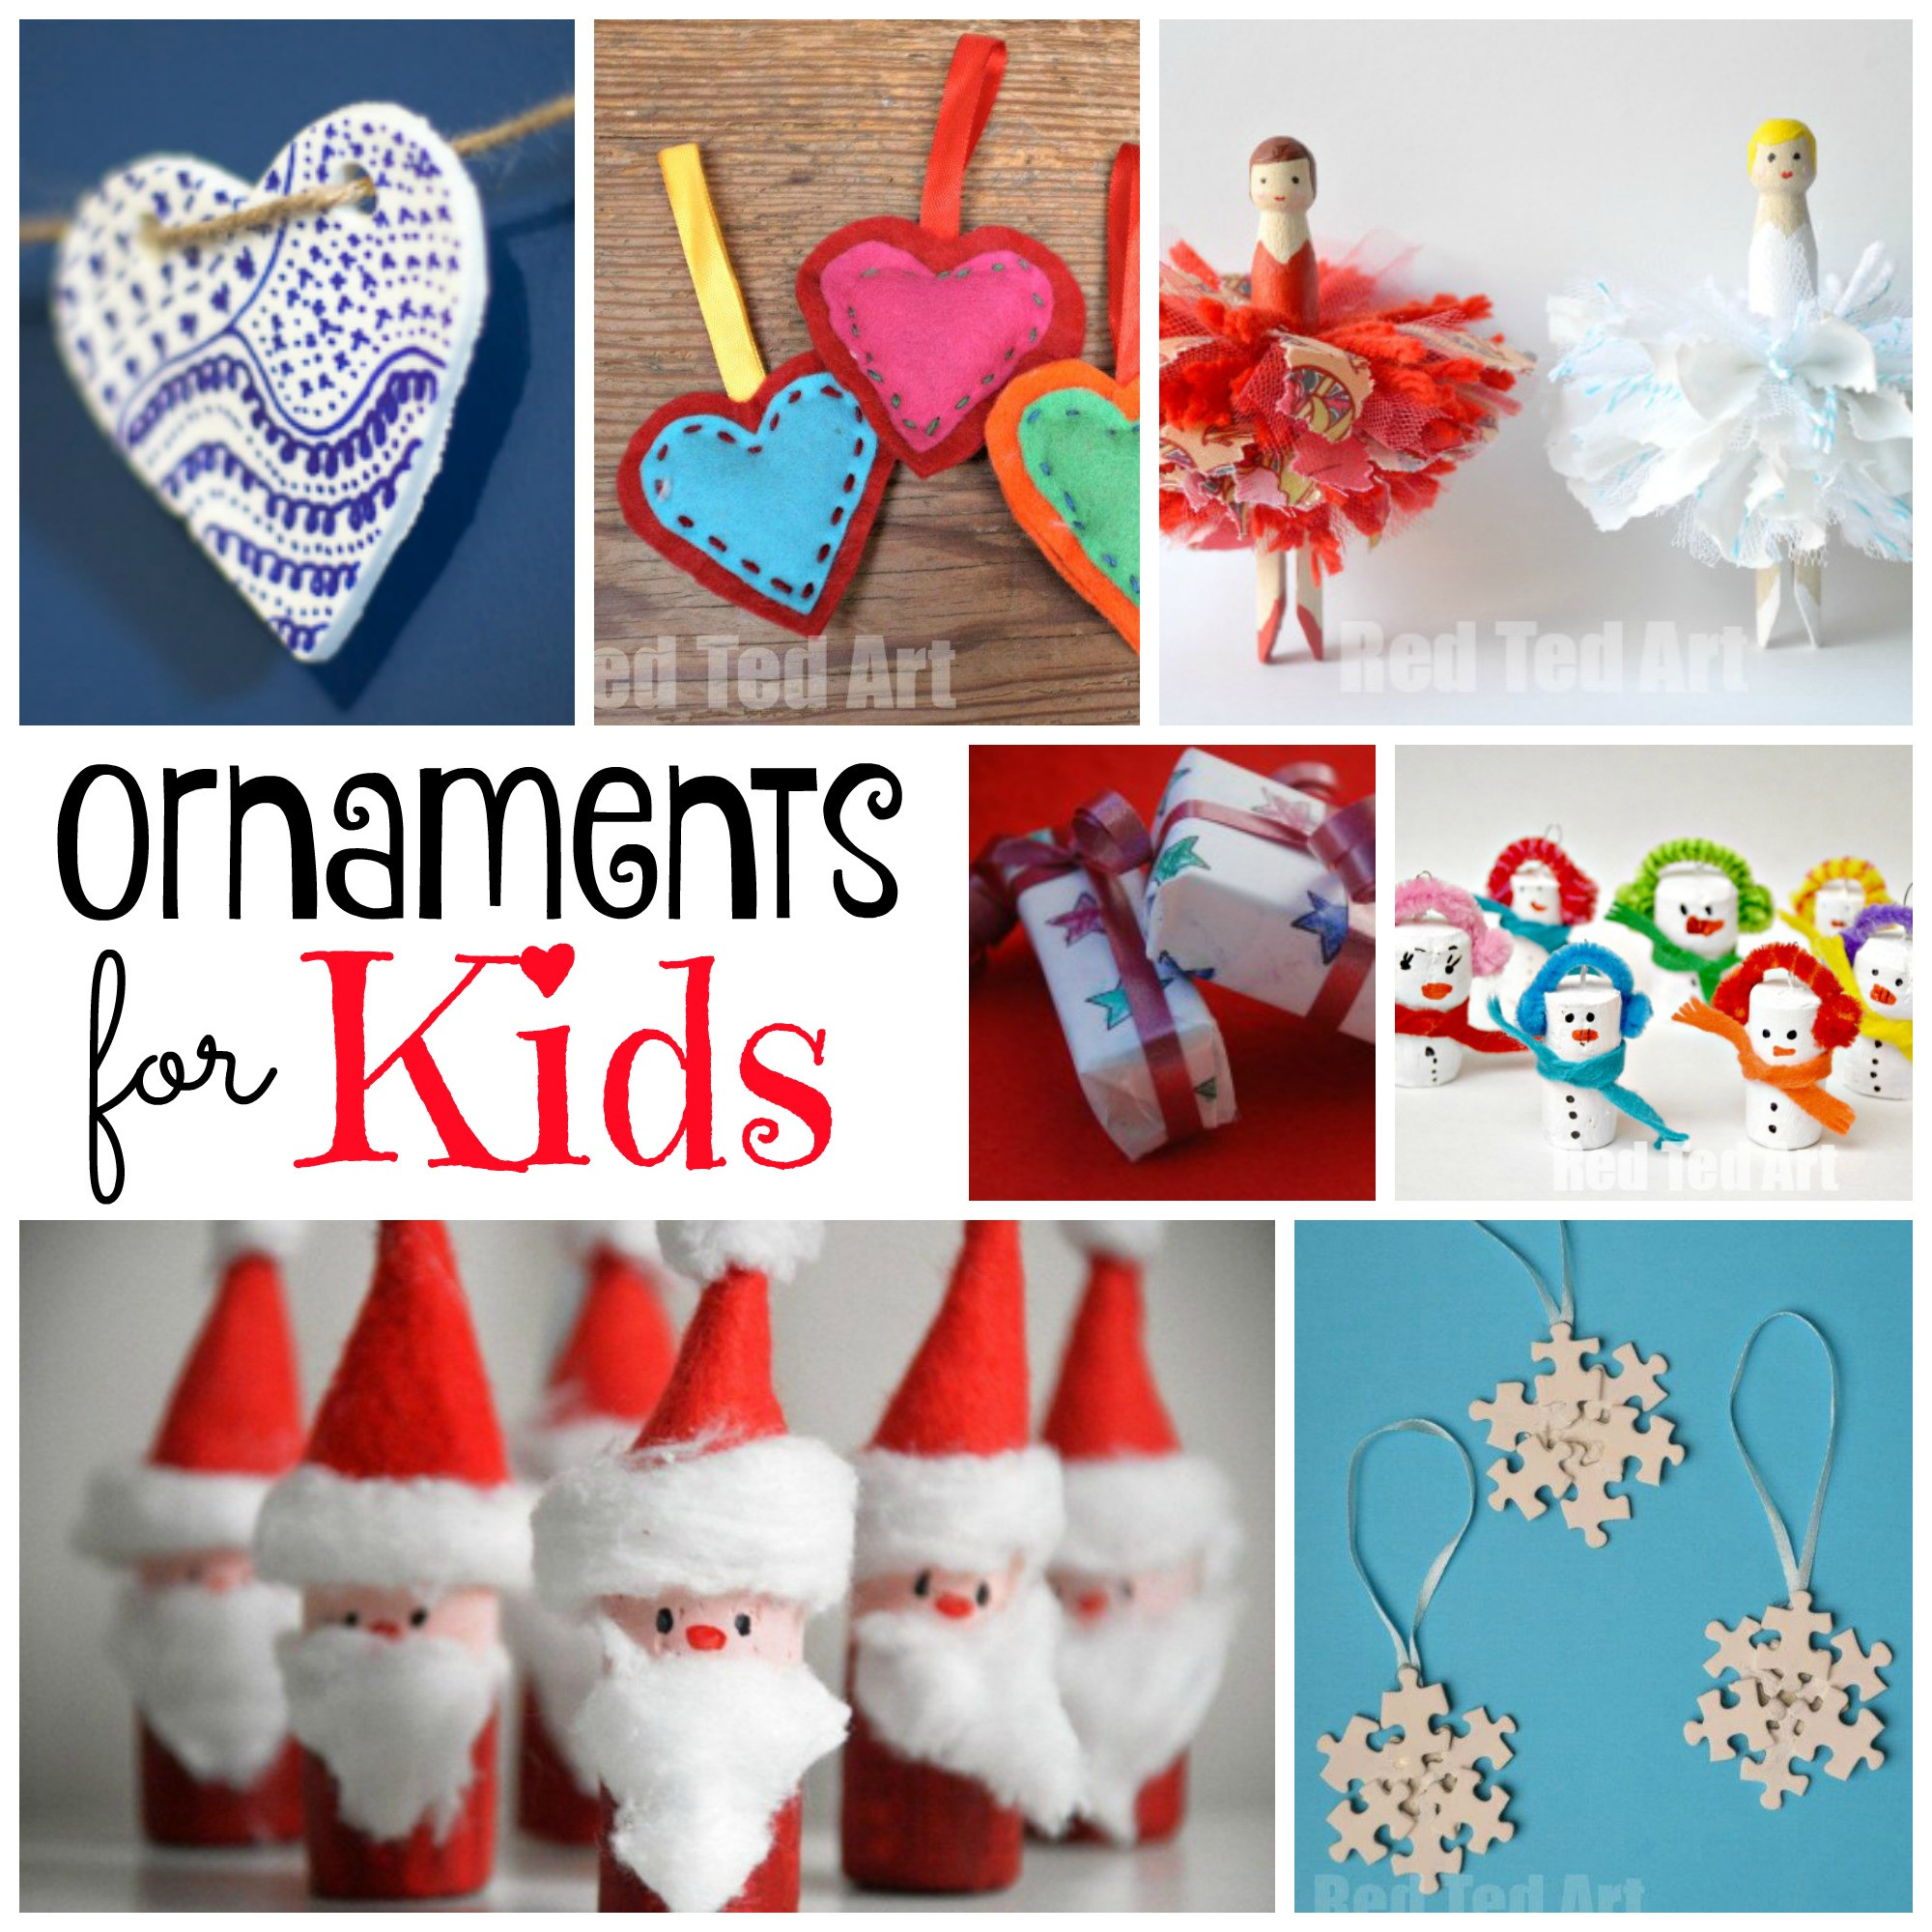 DIY Christmas Ornaments For Kids
 DIY Christmas Ornaments Red Ted Art s Blog